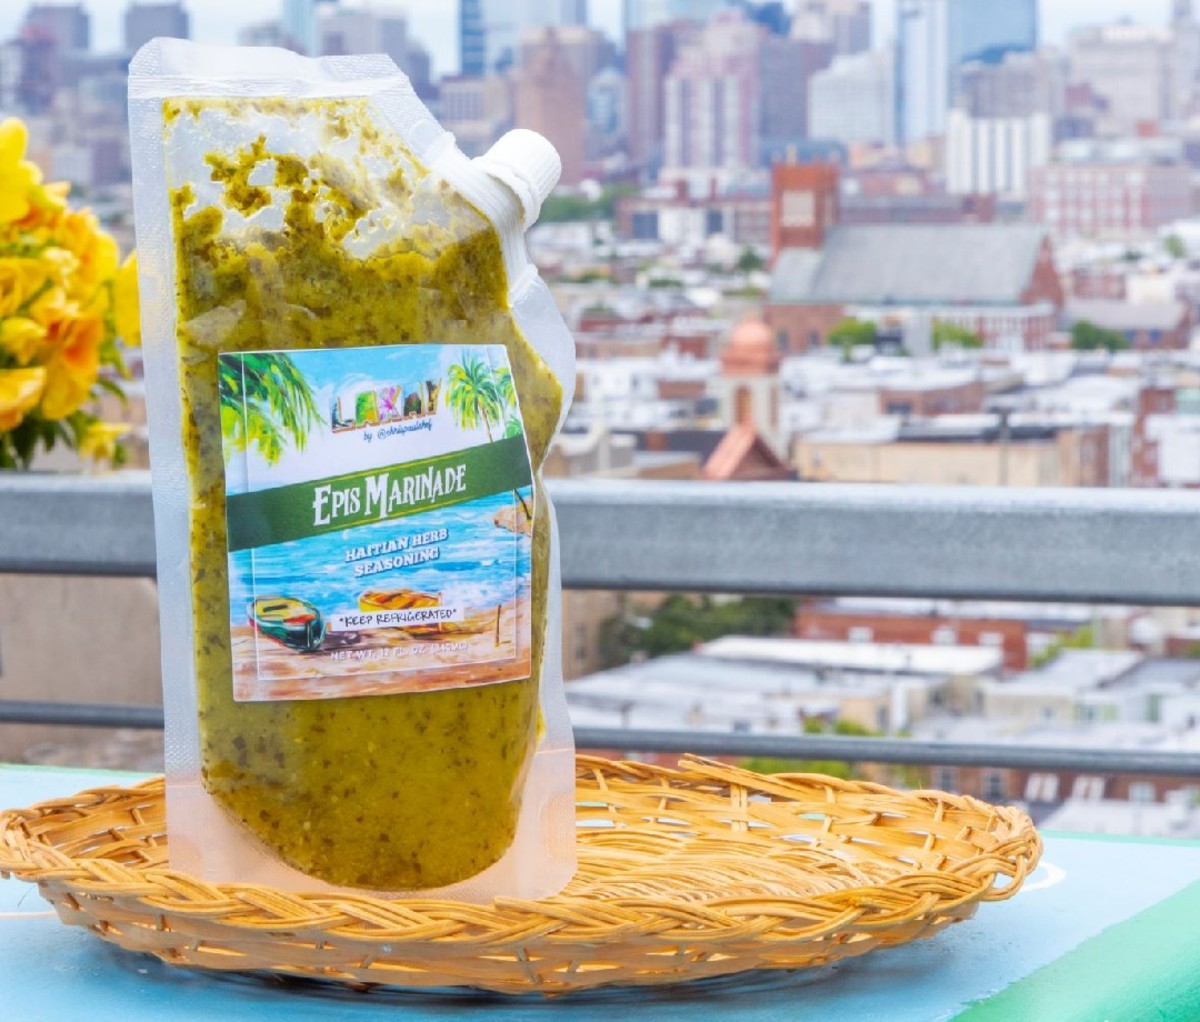 Package of Lakay Epsis marinade on a table with cityscape background